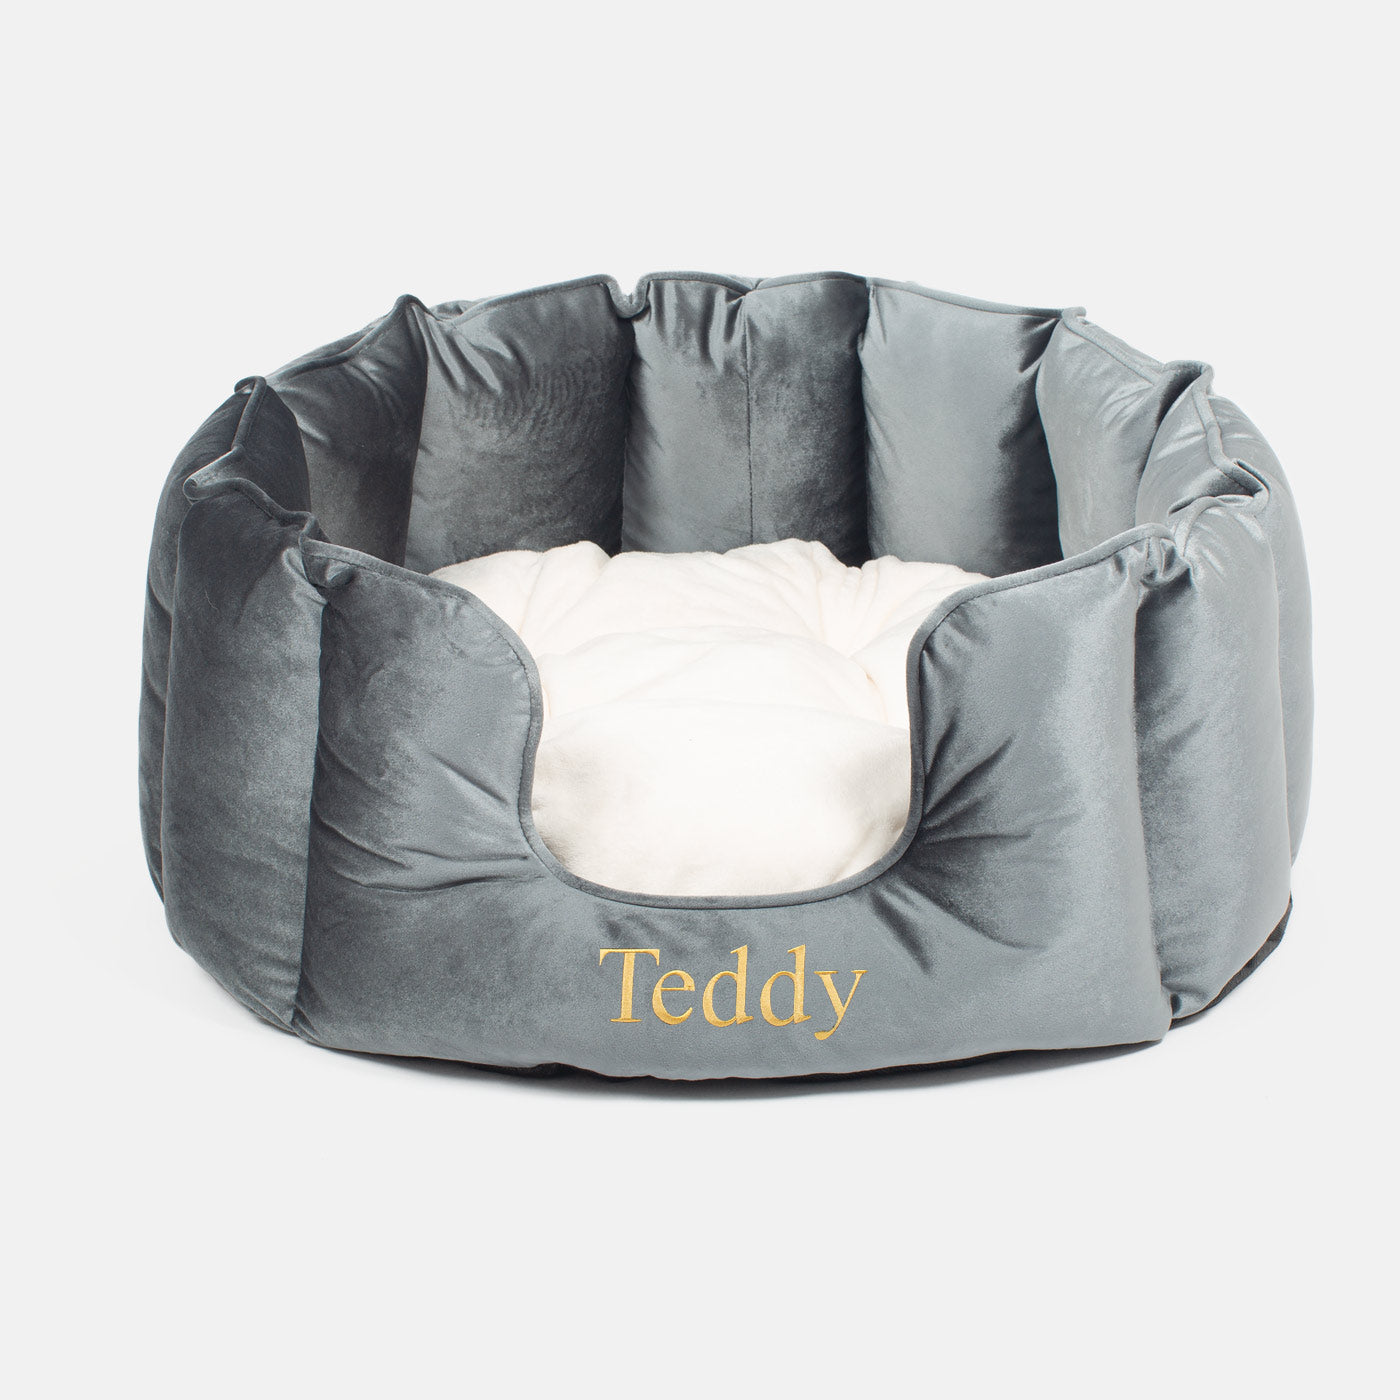 [color:elephant velvet] Discover Our Luxurious Velvet High Wall Bed For Cats, Featuring inner pillow with plush teddy fleece on one side To Craft The Perfect Cat Bed In Stunning Elephant Velvet! Available To Personalize Now at Lords & Labradors US